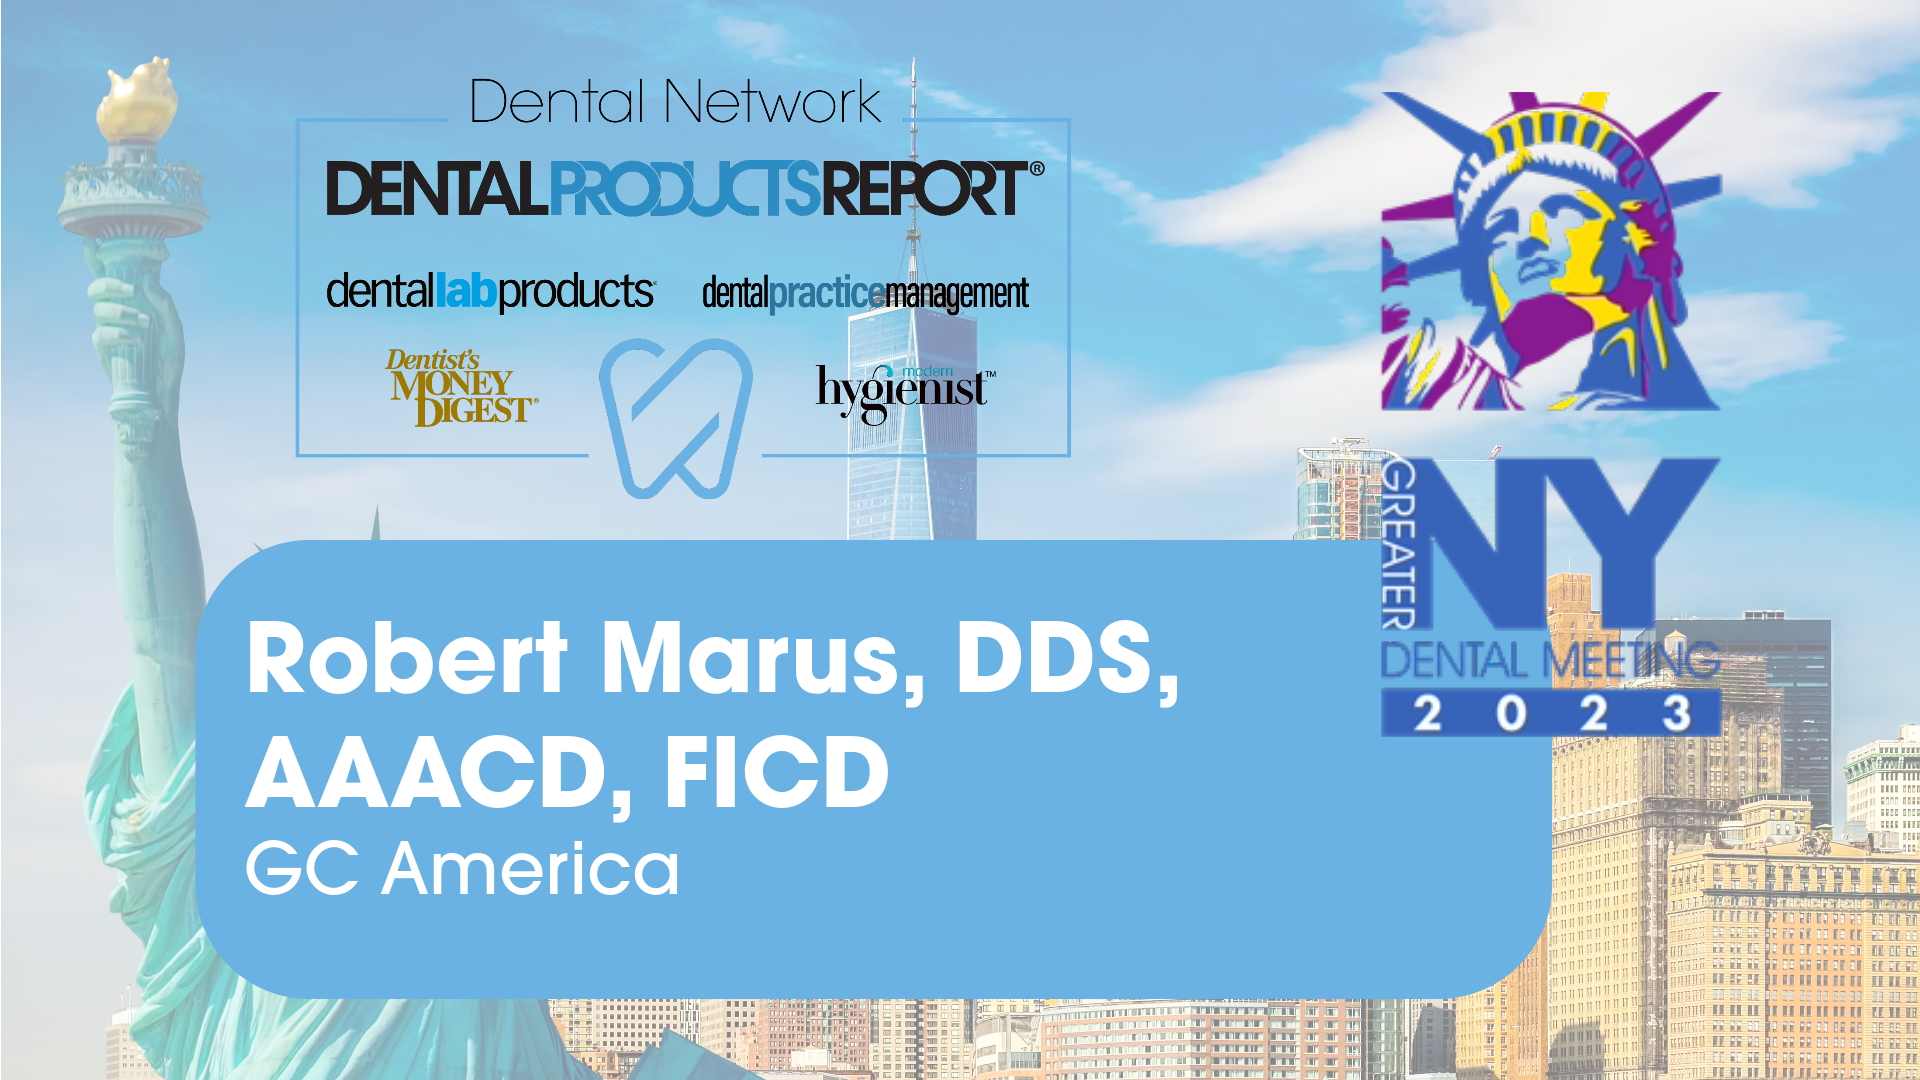 Greater New York Dental Meeting 2023 - Interview with Robert Marus, DDS, AAACD, FICD